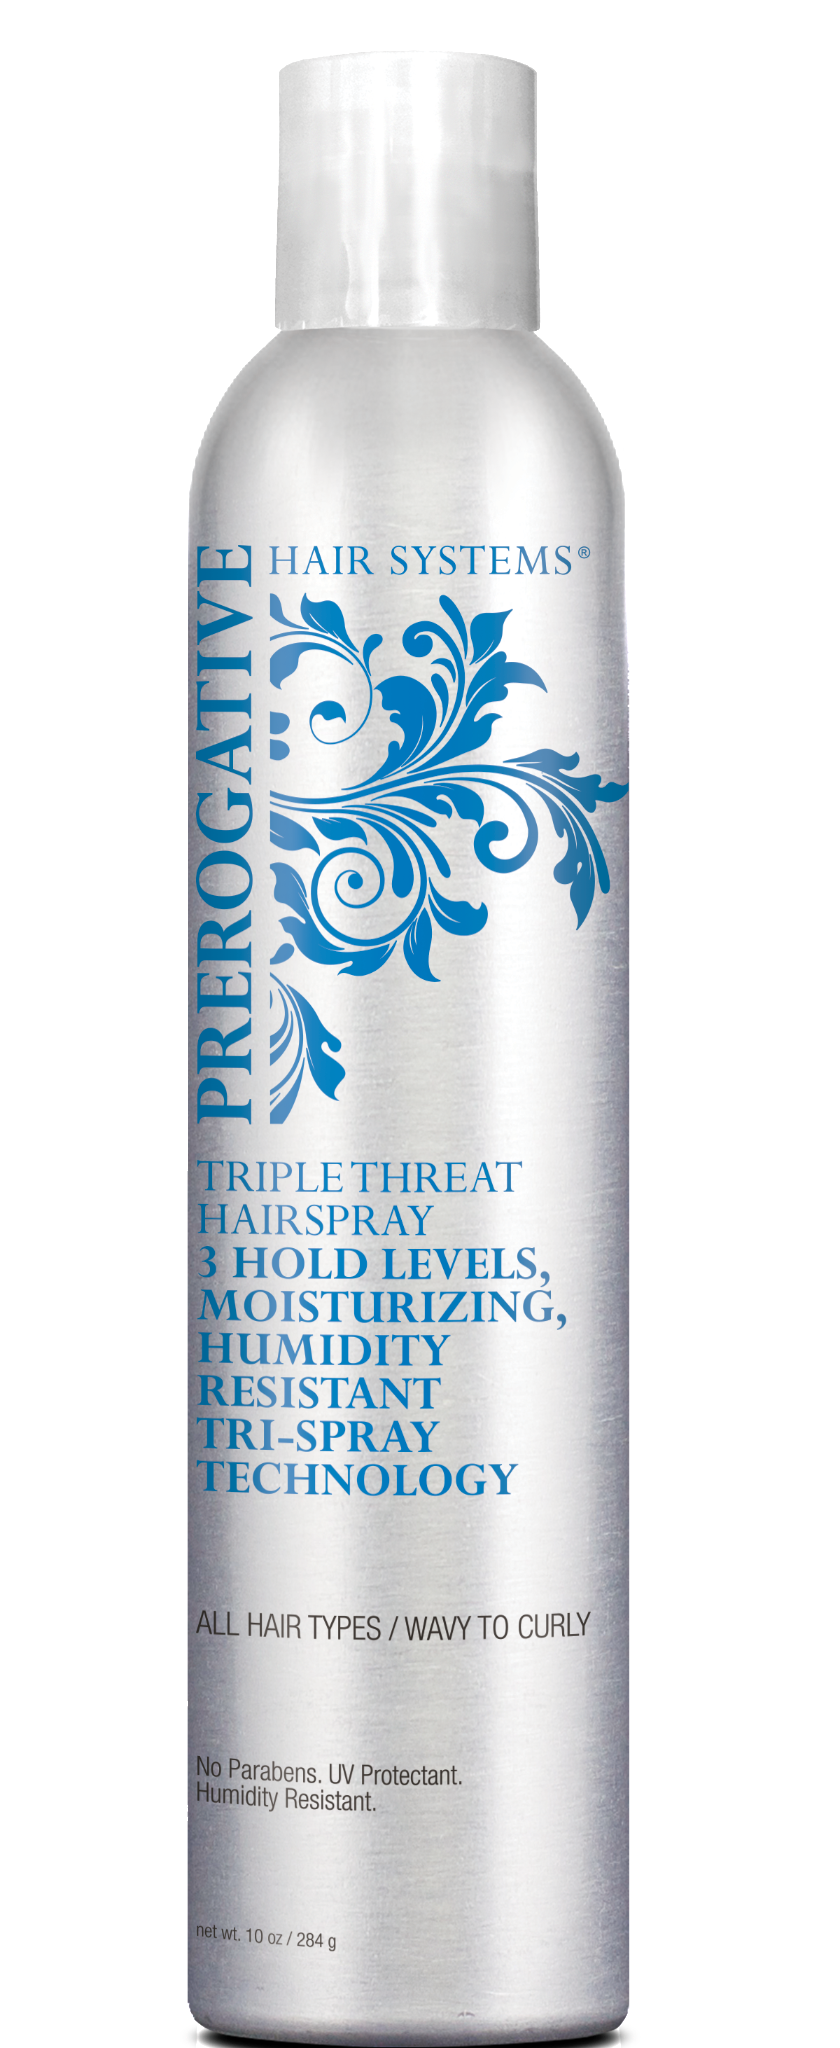 TRIPLE THREAT Hairspray - This breakthrough natural hair hold spray features 3 levels of hold in one can and moisturizes the hair!